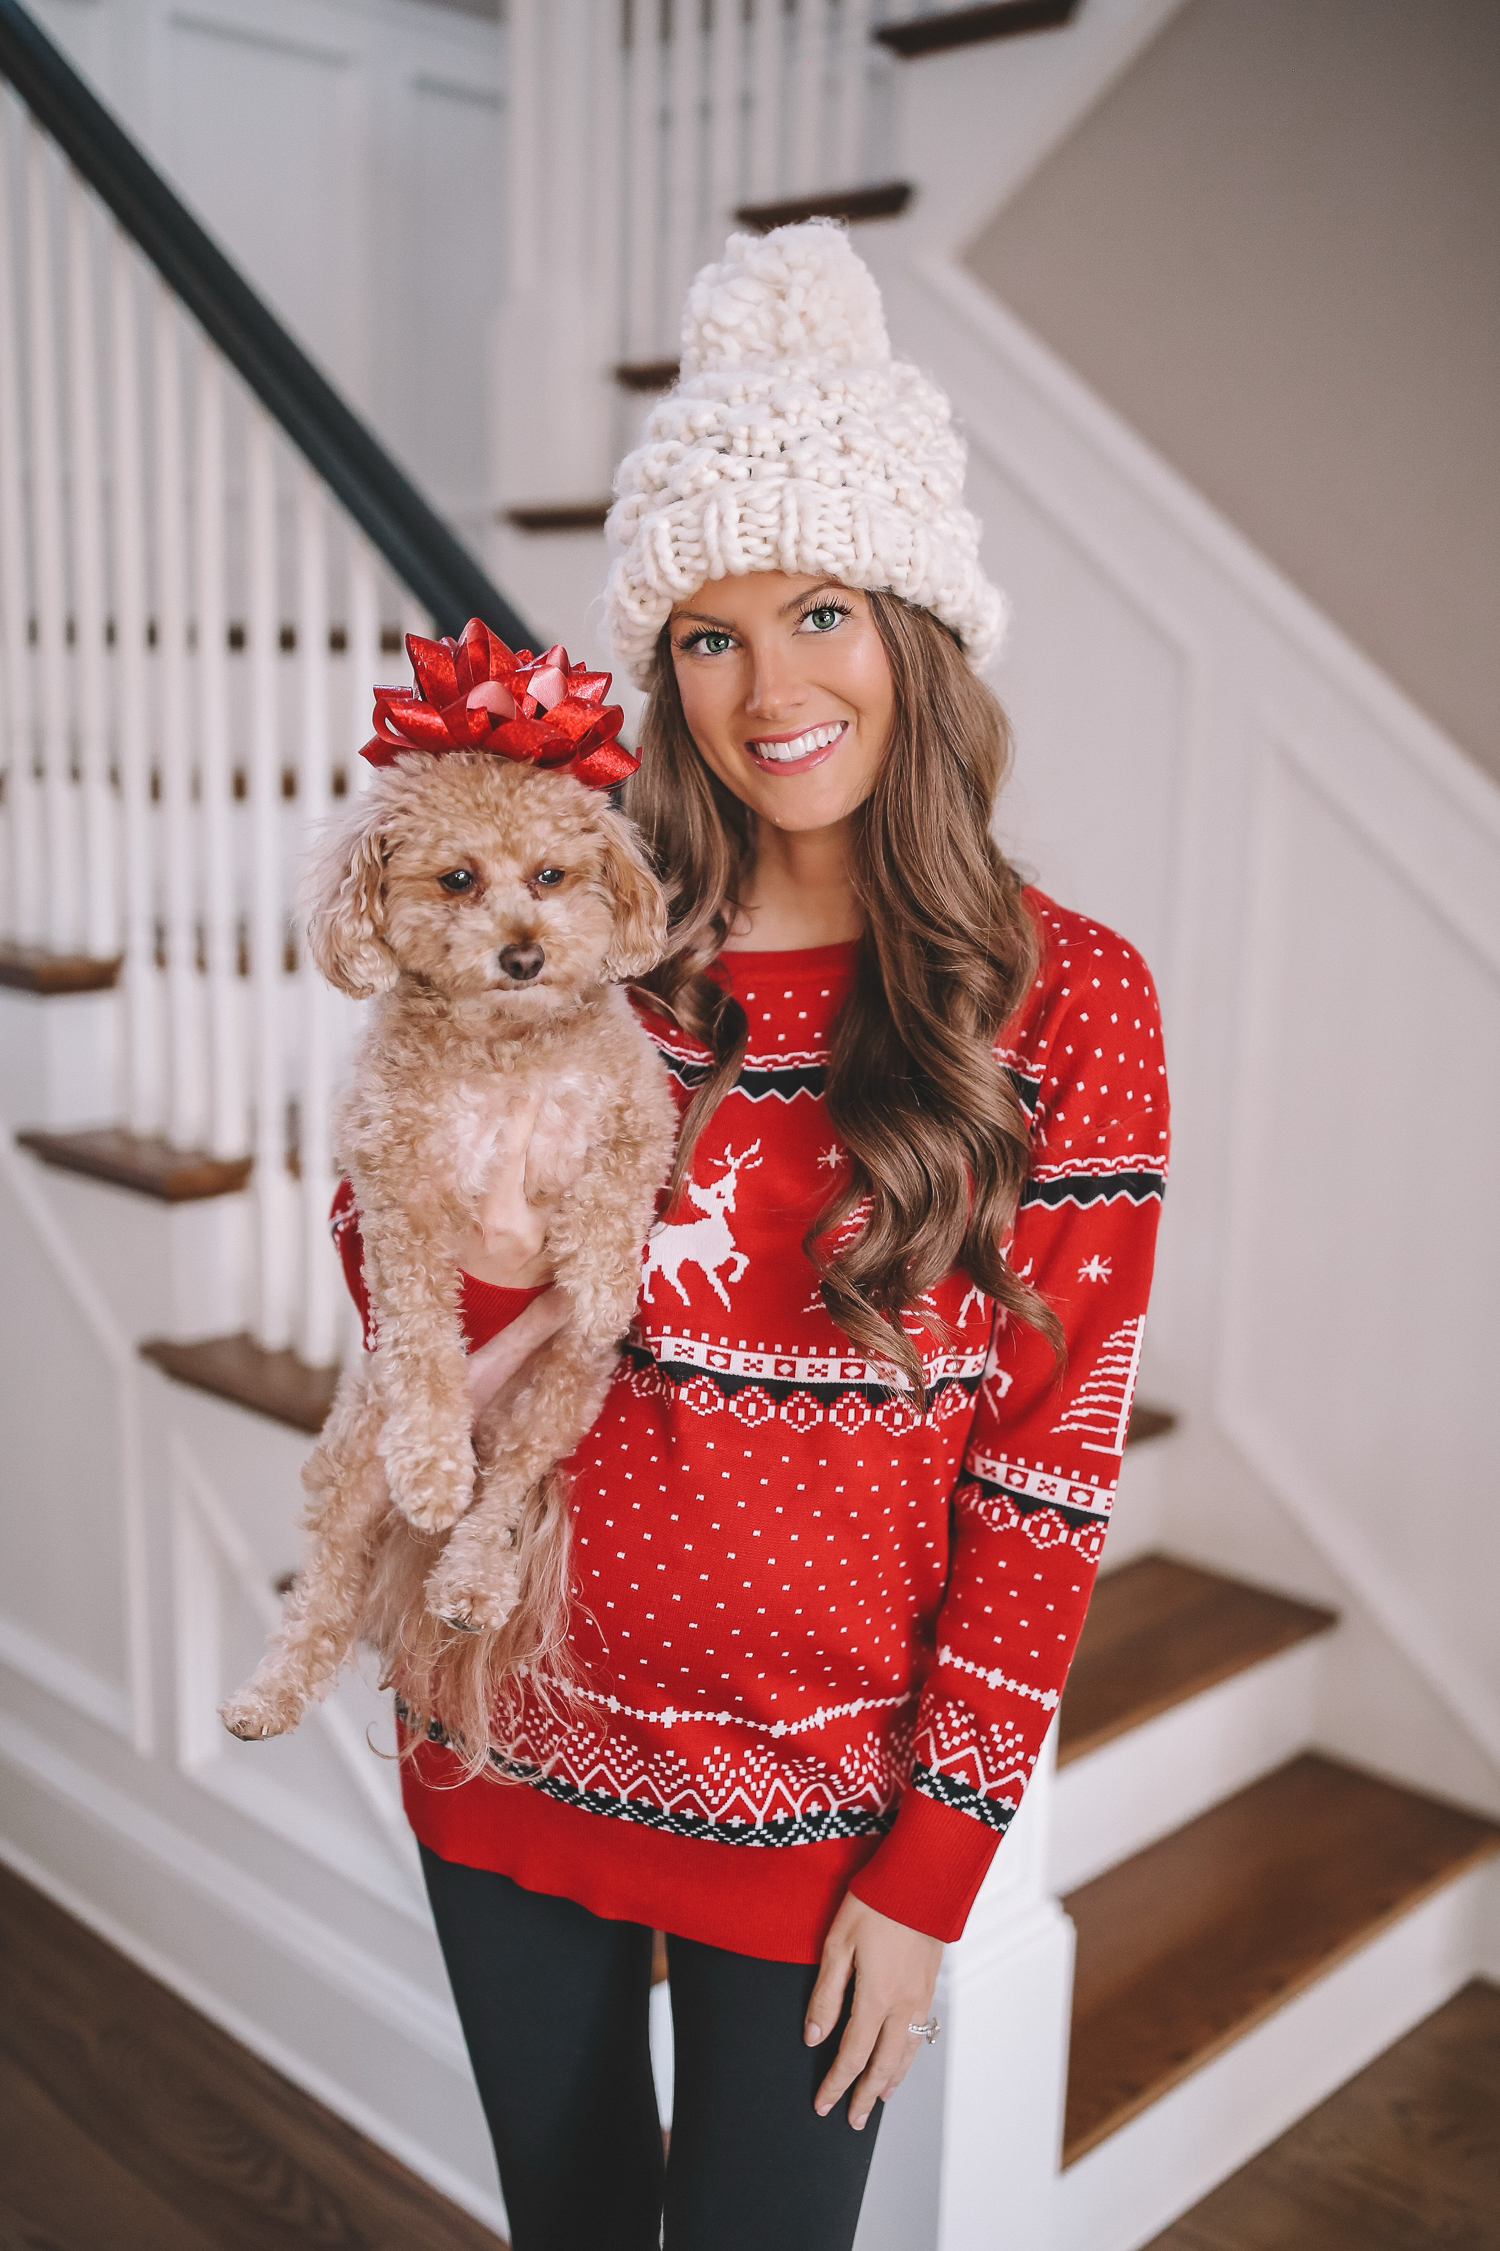 https://www.southerncurlsandpearls.com/wp-content/uploads/2020/11/ugly-christmas-sweater-2-1.jpg